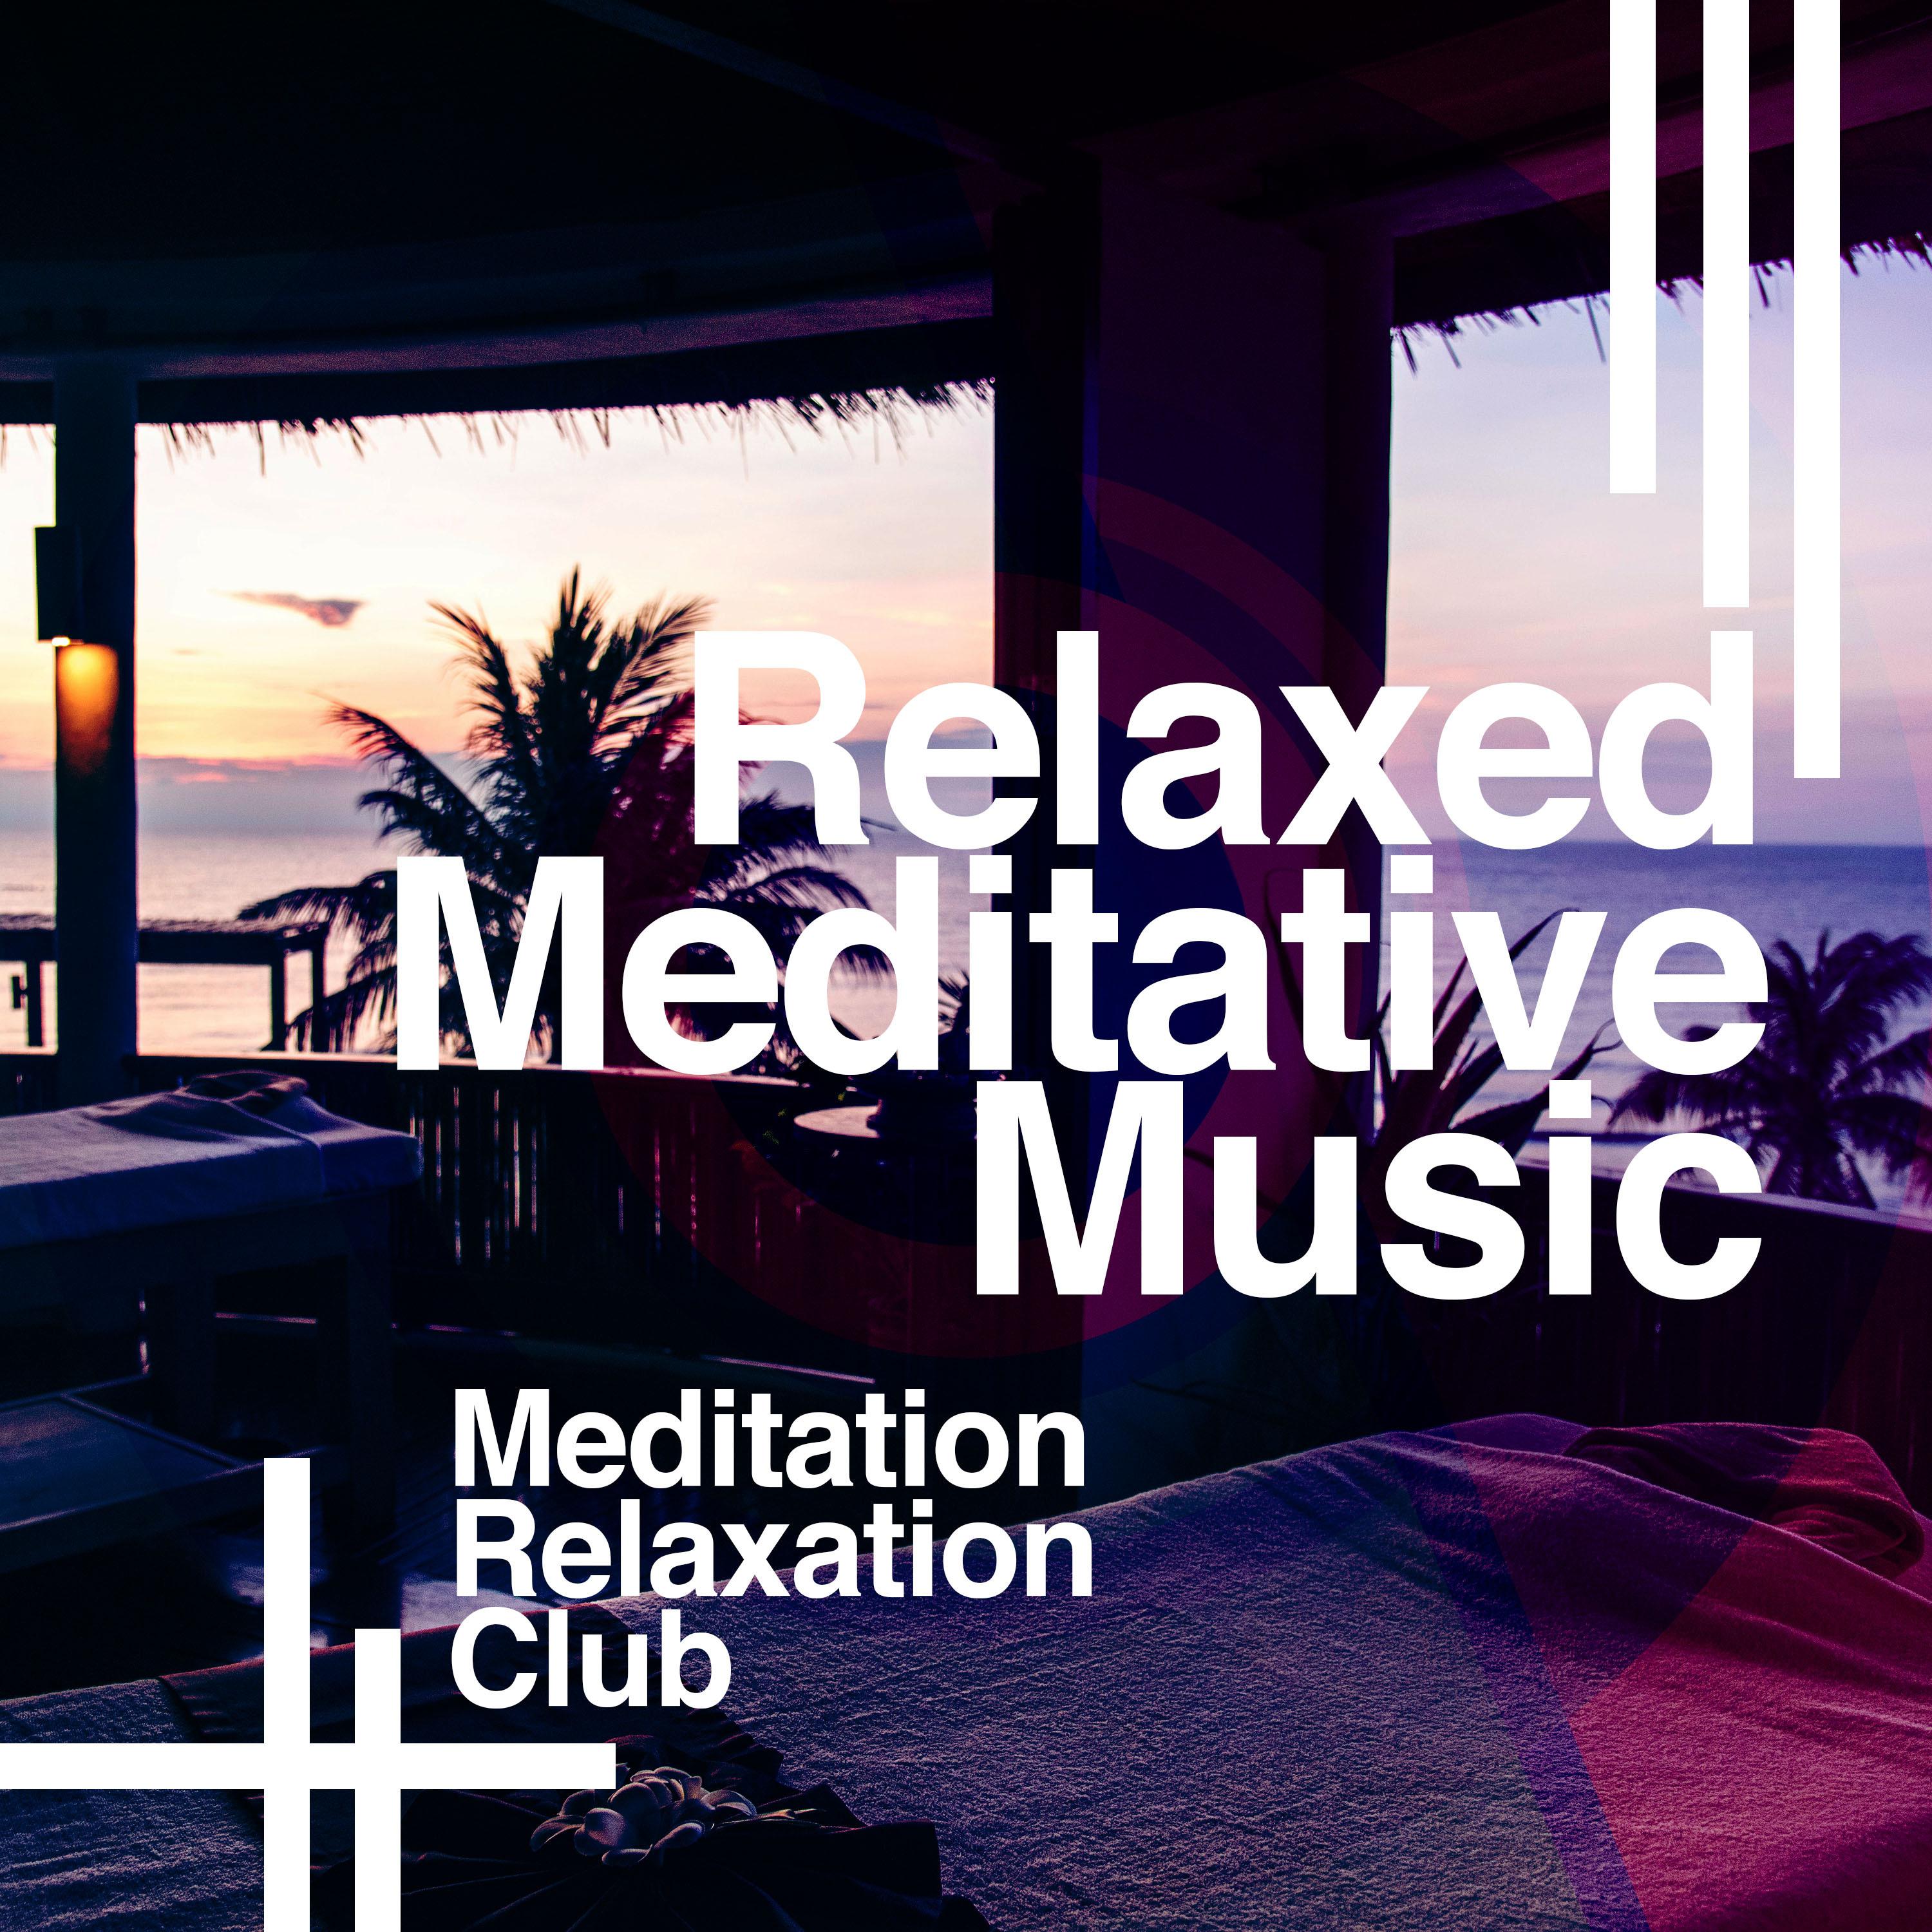 Relaxed Meditative Music